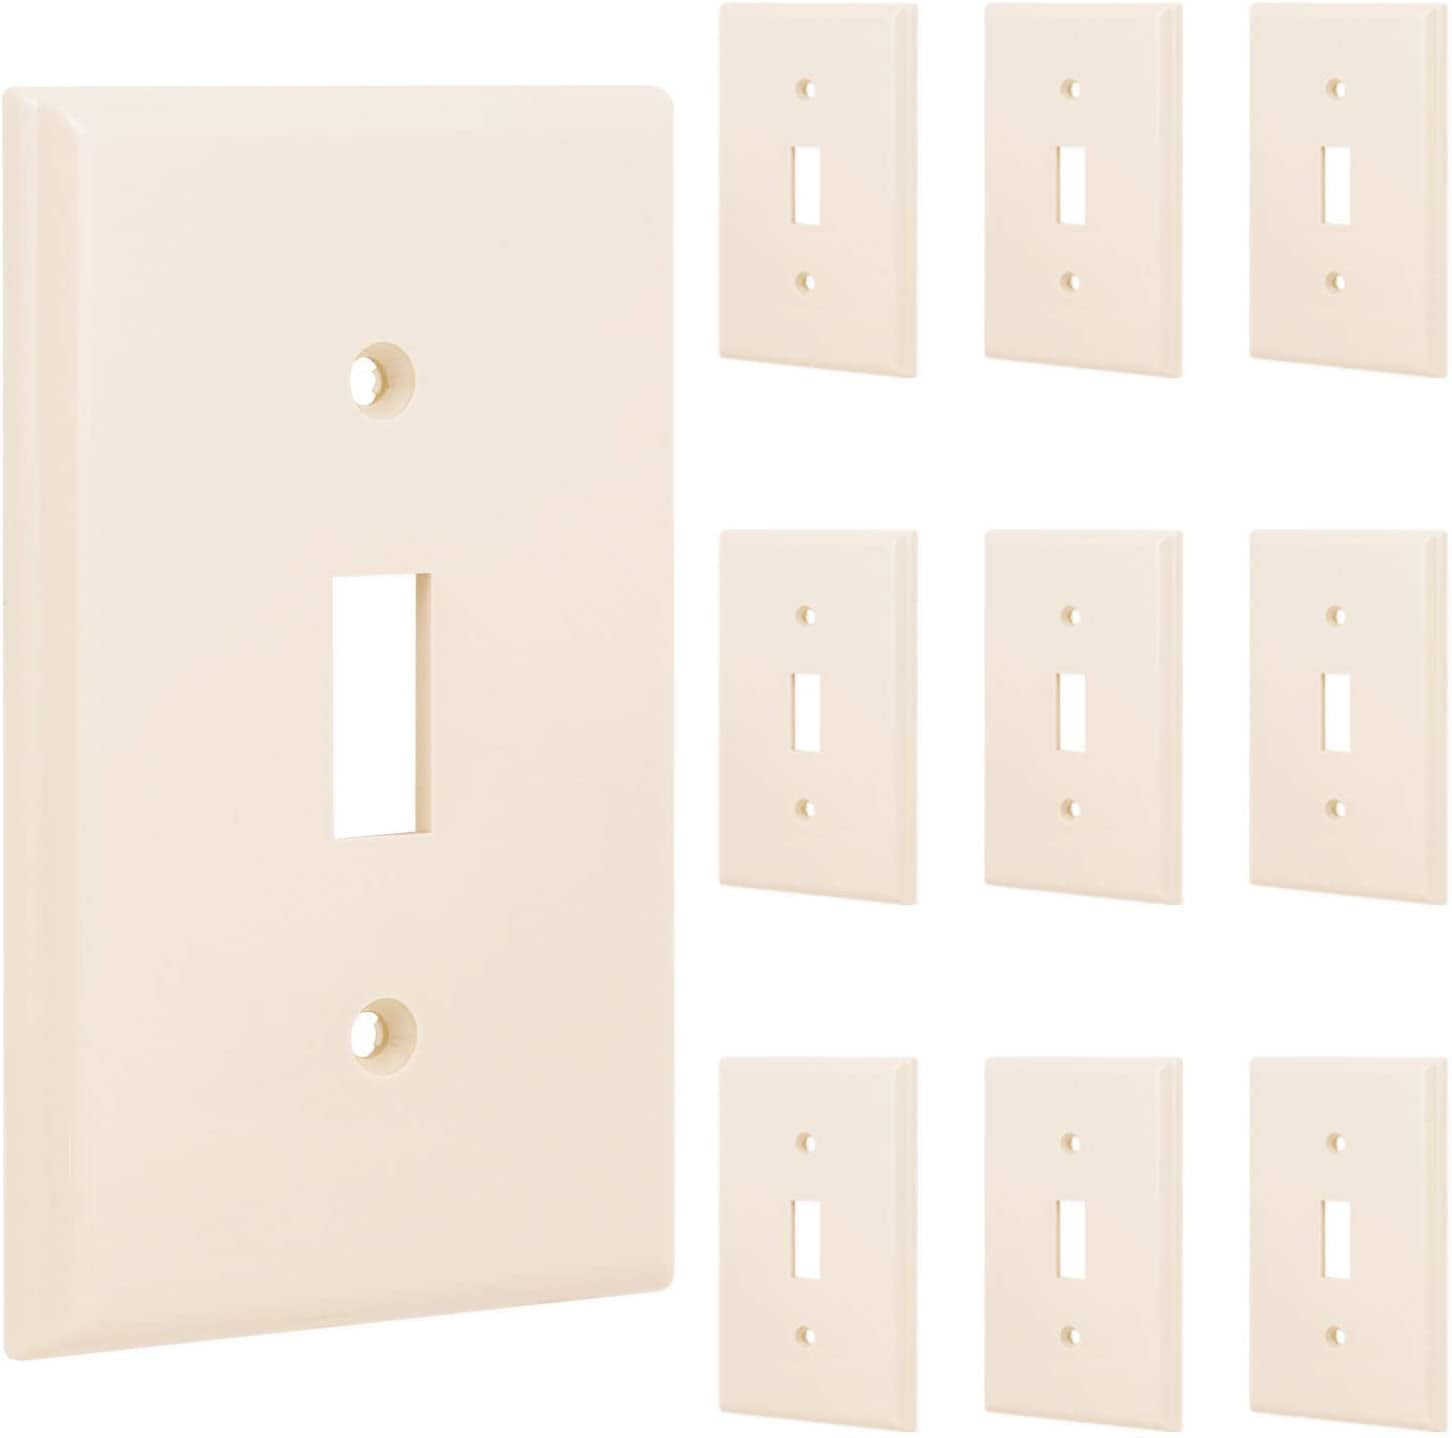 1 Gang 2.75” x 4.5” Light Almond Power Gear Outlet Wall Plate Cover 10 Pack Screws Included Standard 51199 Duplex Receptacle Wallplate Unbreakable Faceplate